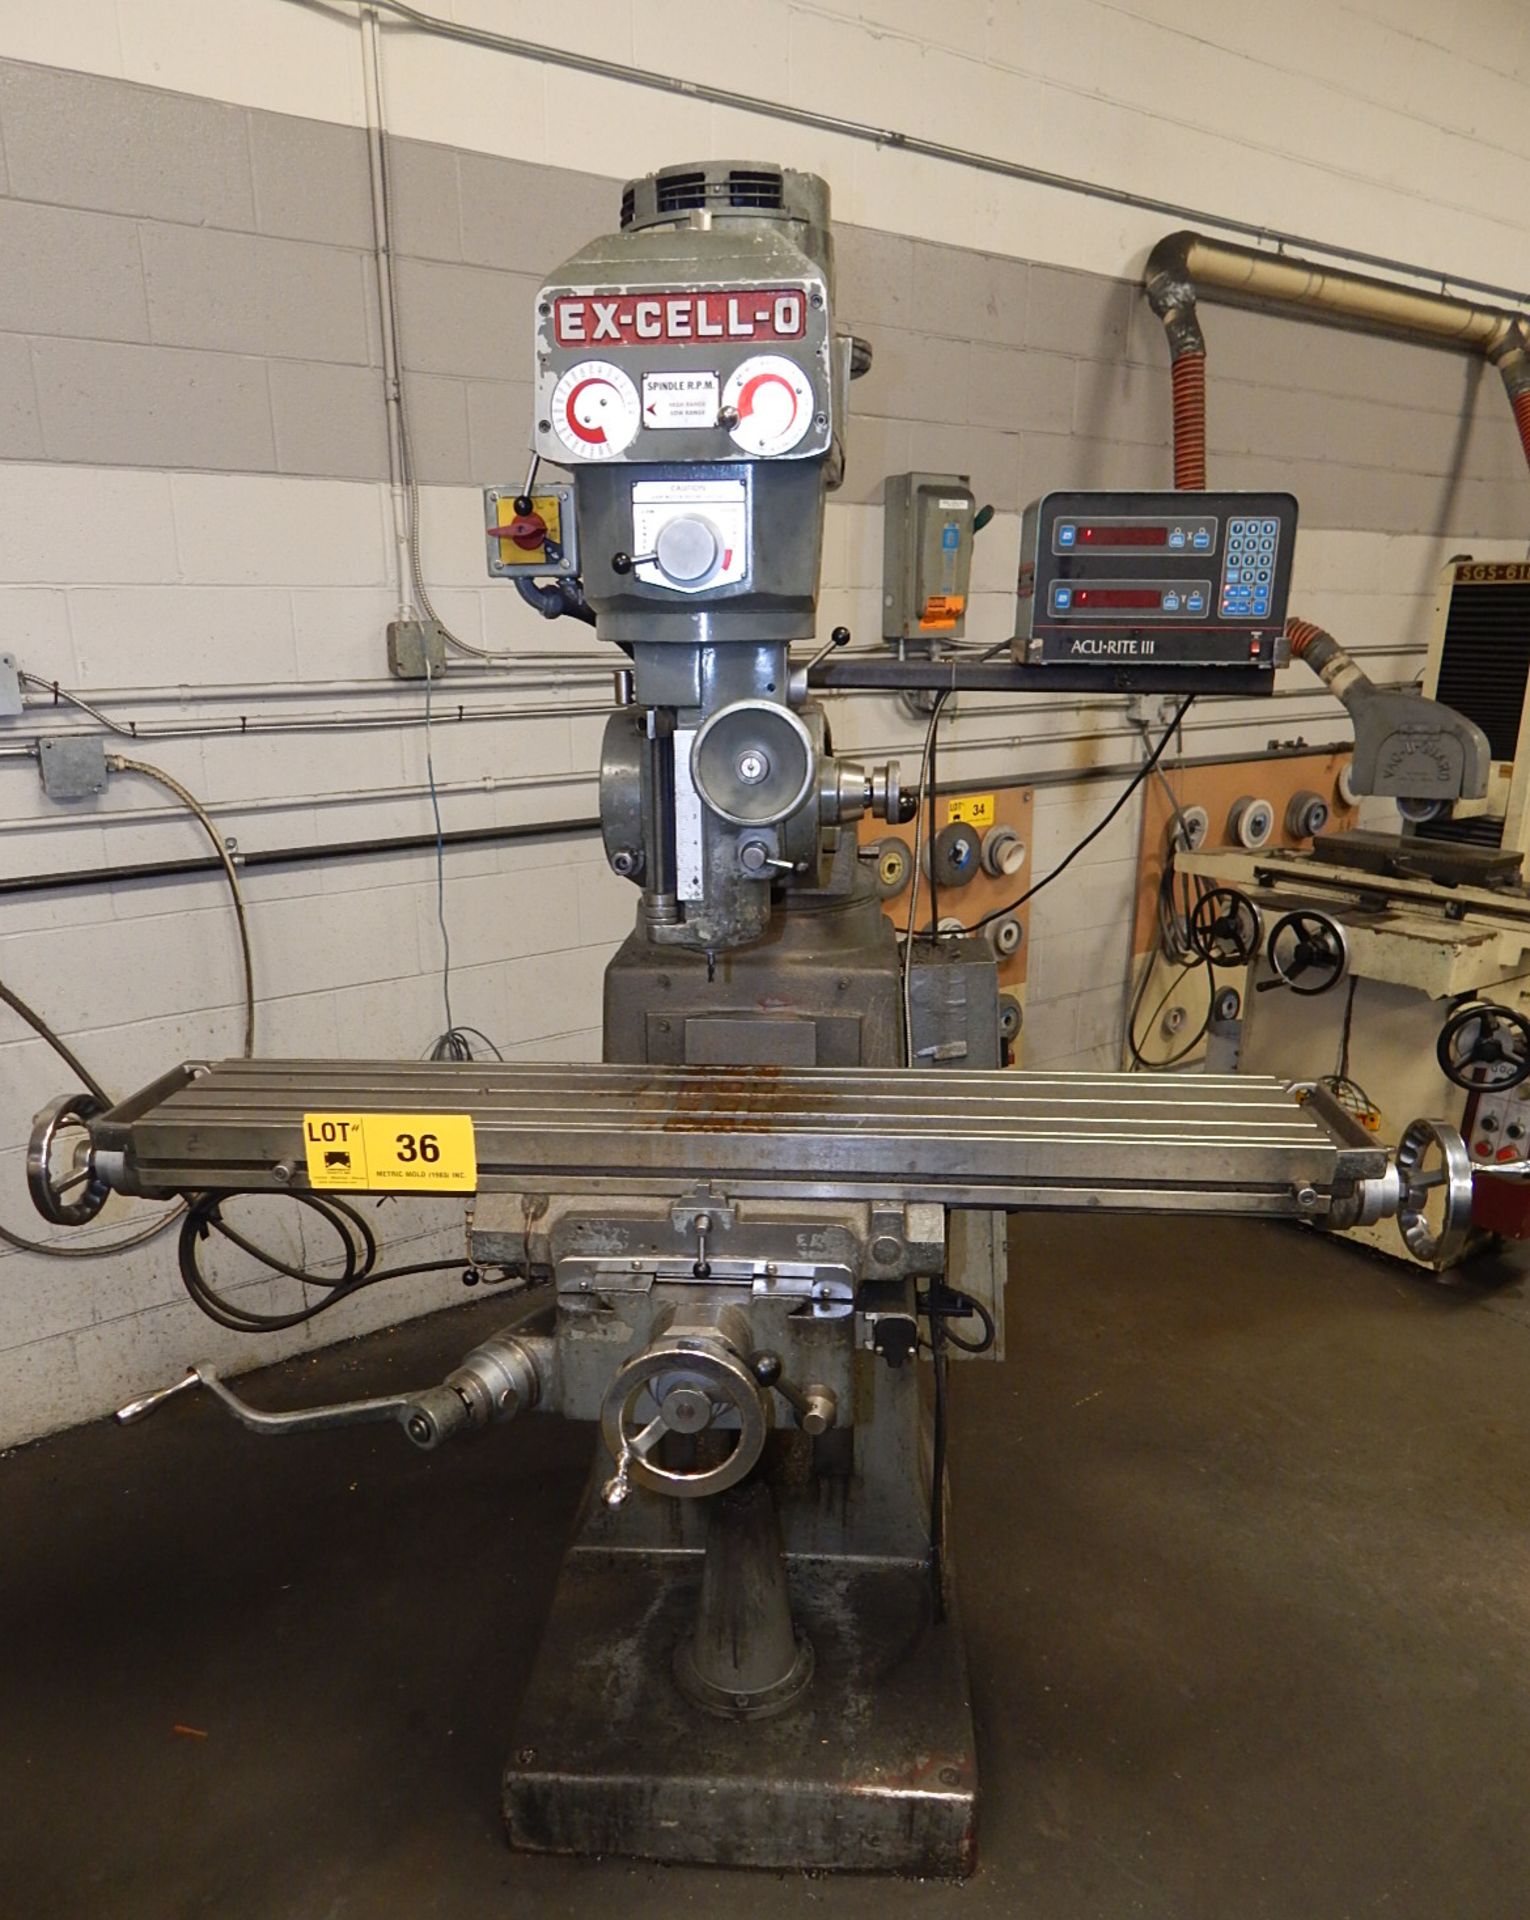 EX-CELL-O MODEL 602 VERTICAL TURRET MILL WITH 48"X9" TABLE SPEEDS TO 4000 RPM, ACCURITE III 2 AXIS